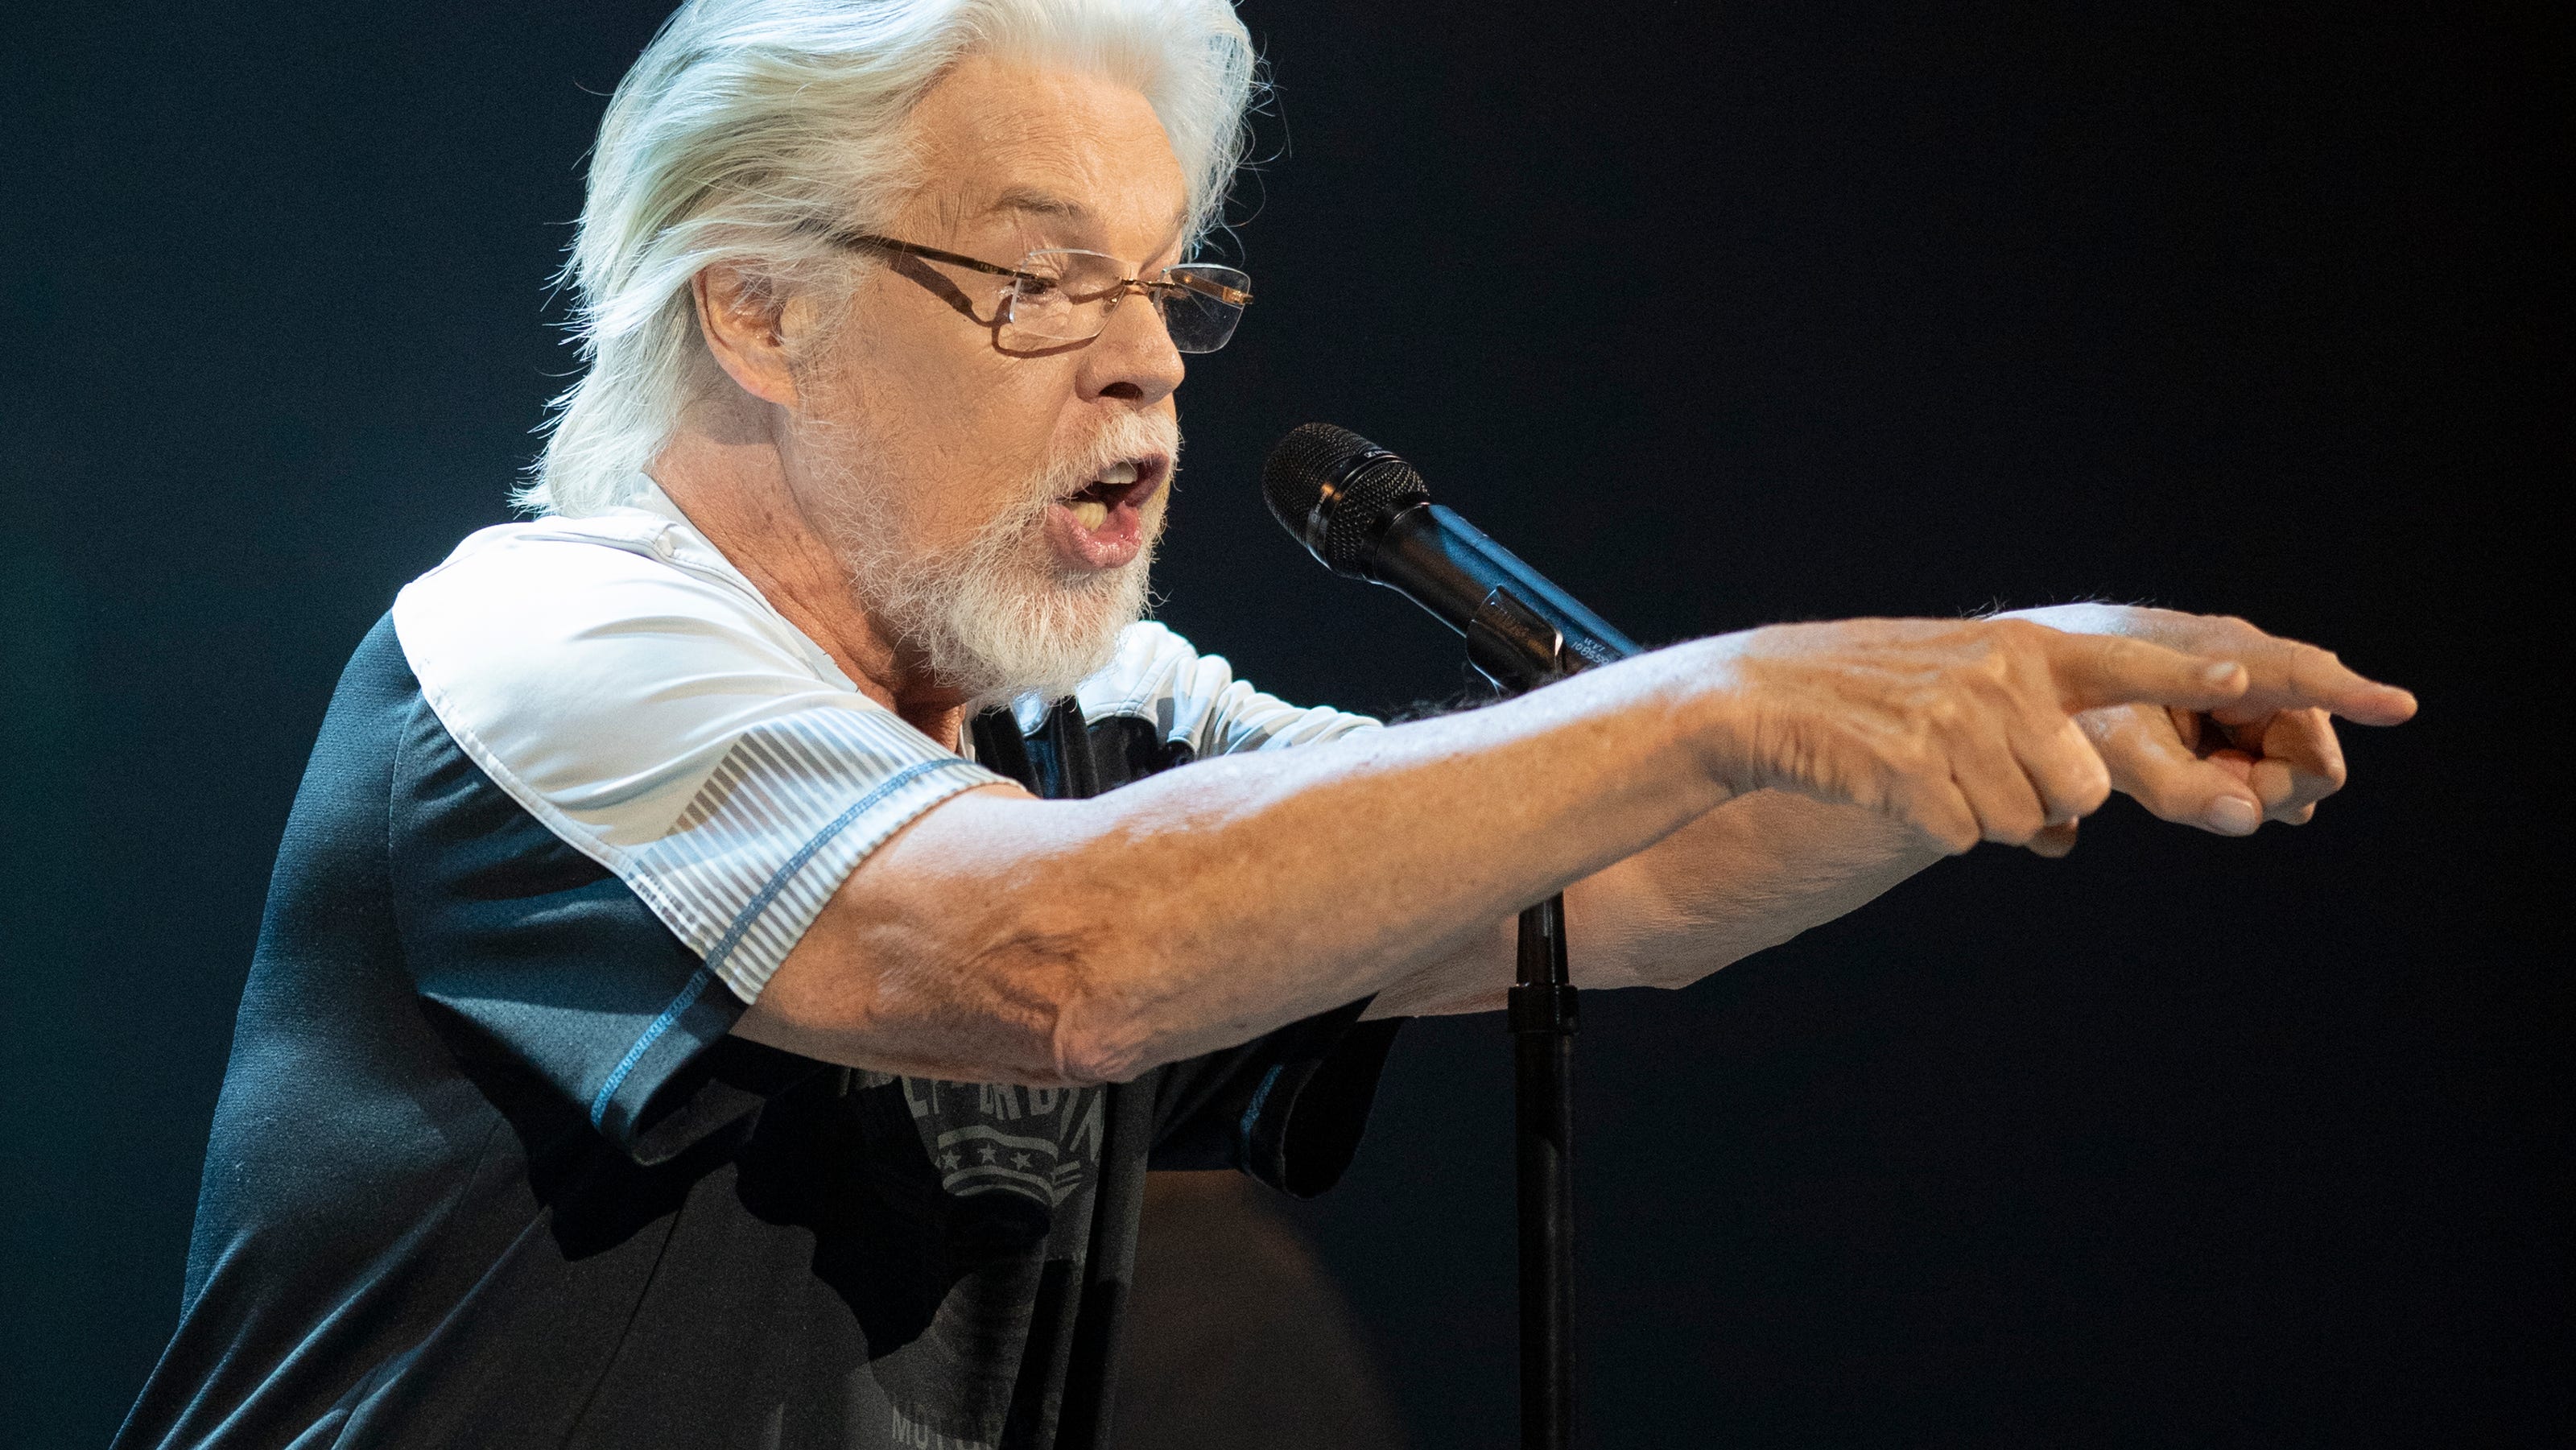 Bob Seger gives Indianapolis one final night of rock 'n' roll memories